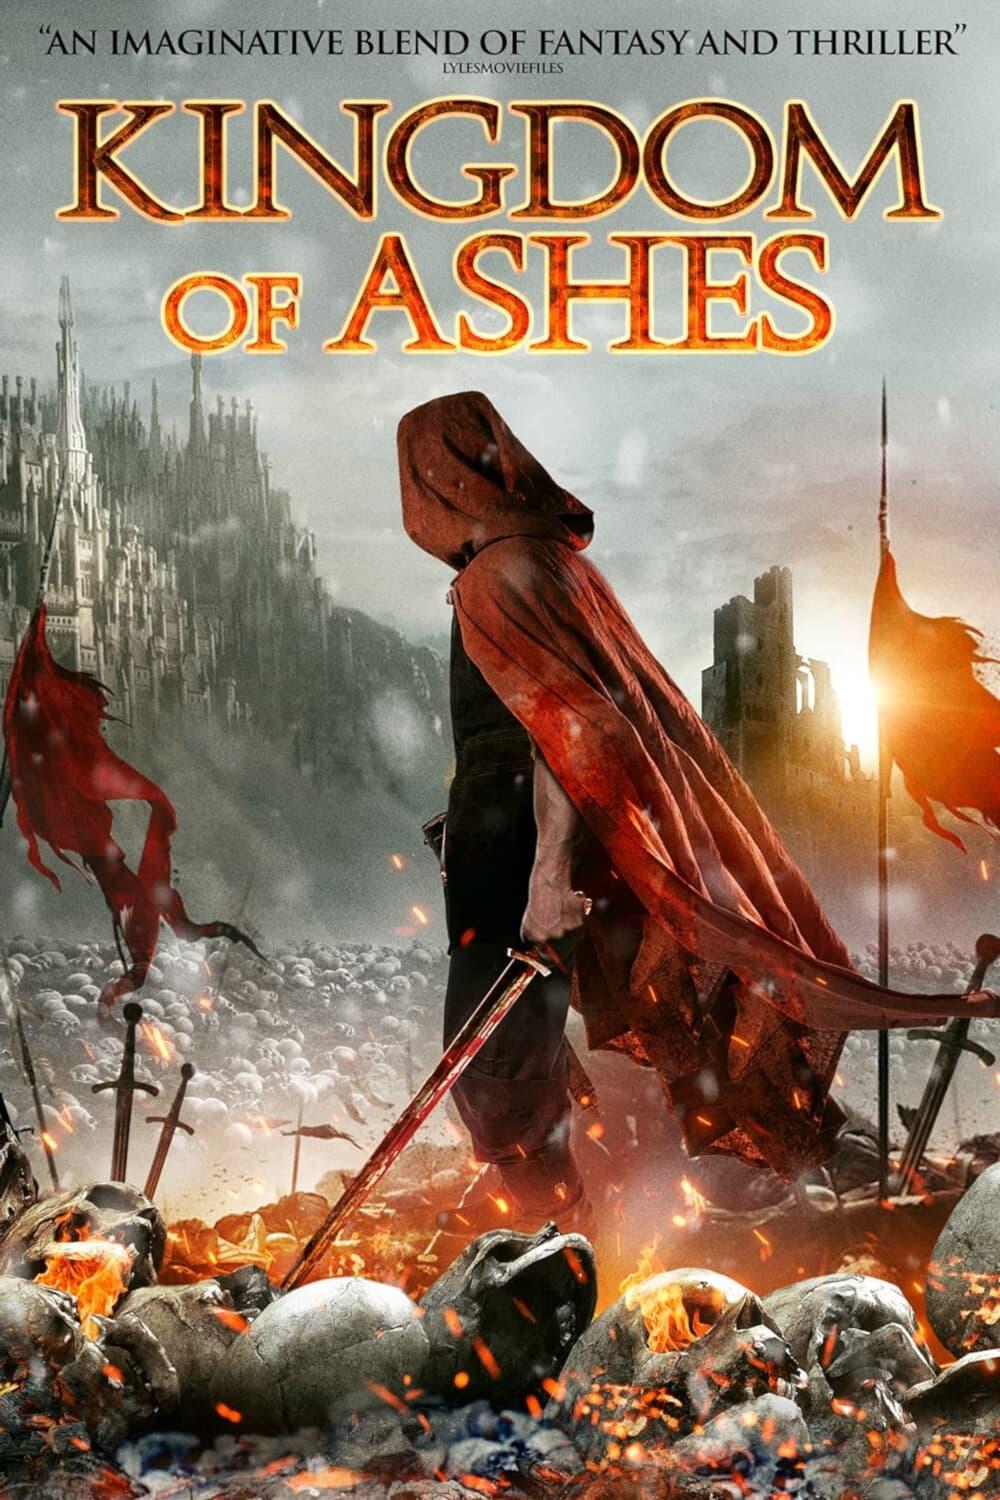 Trail of Ashes poster